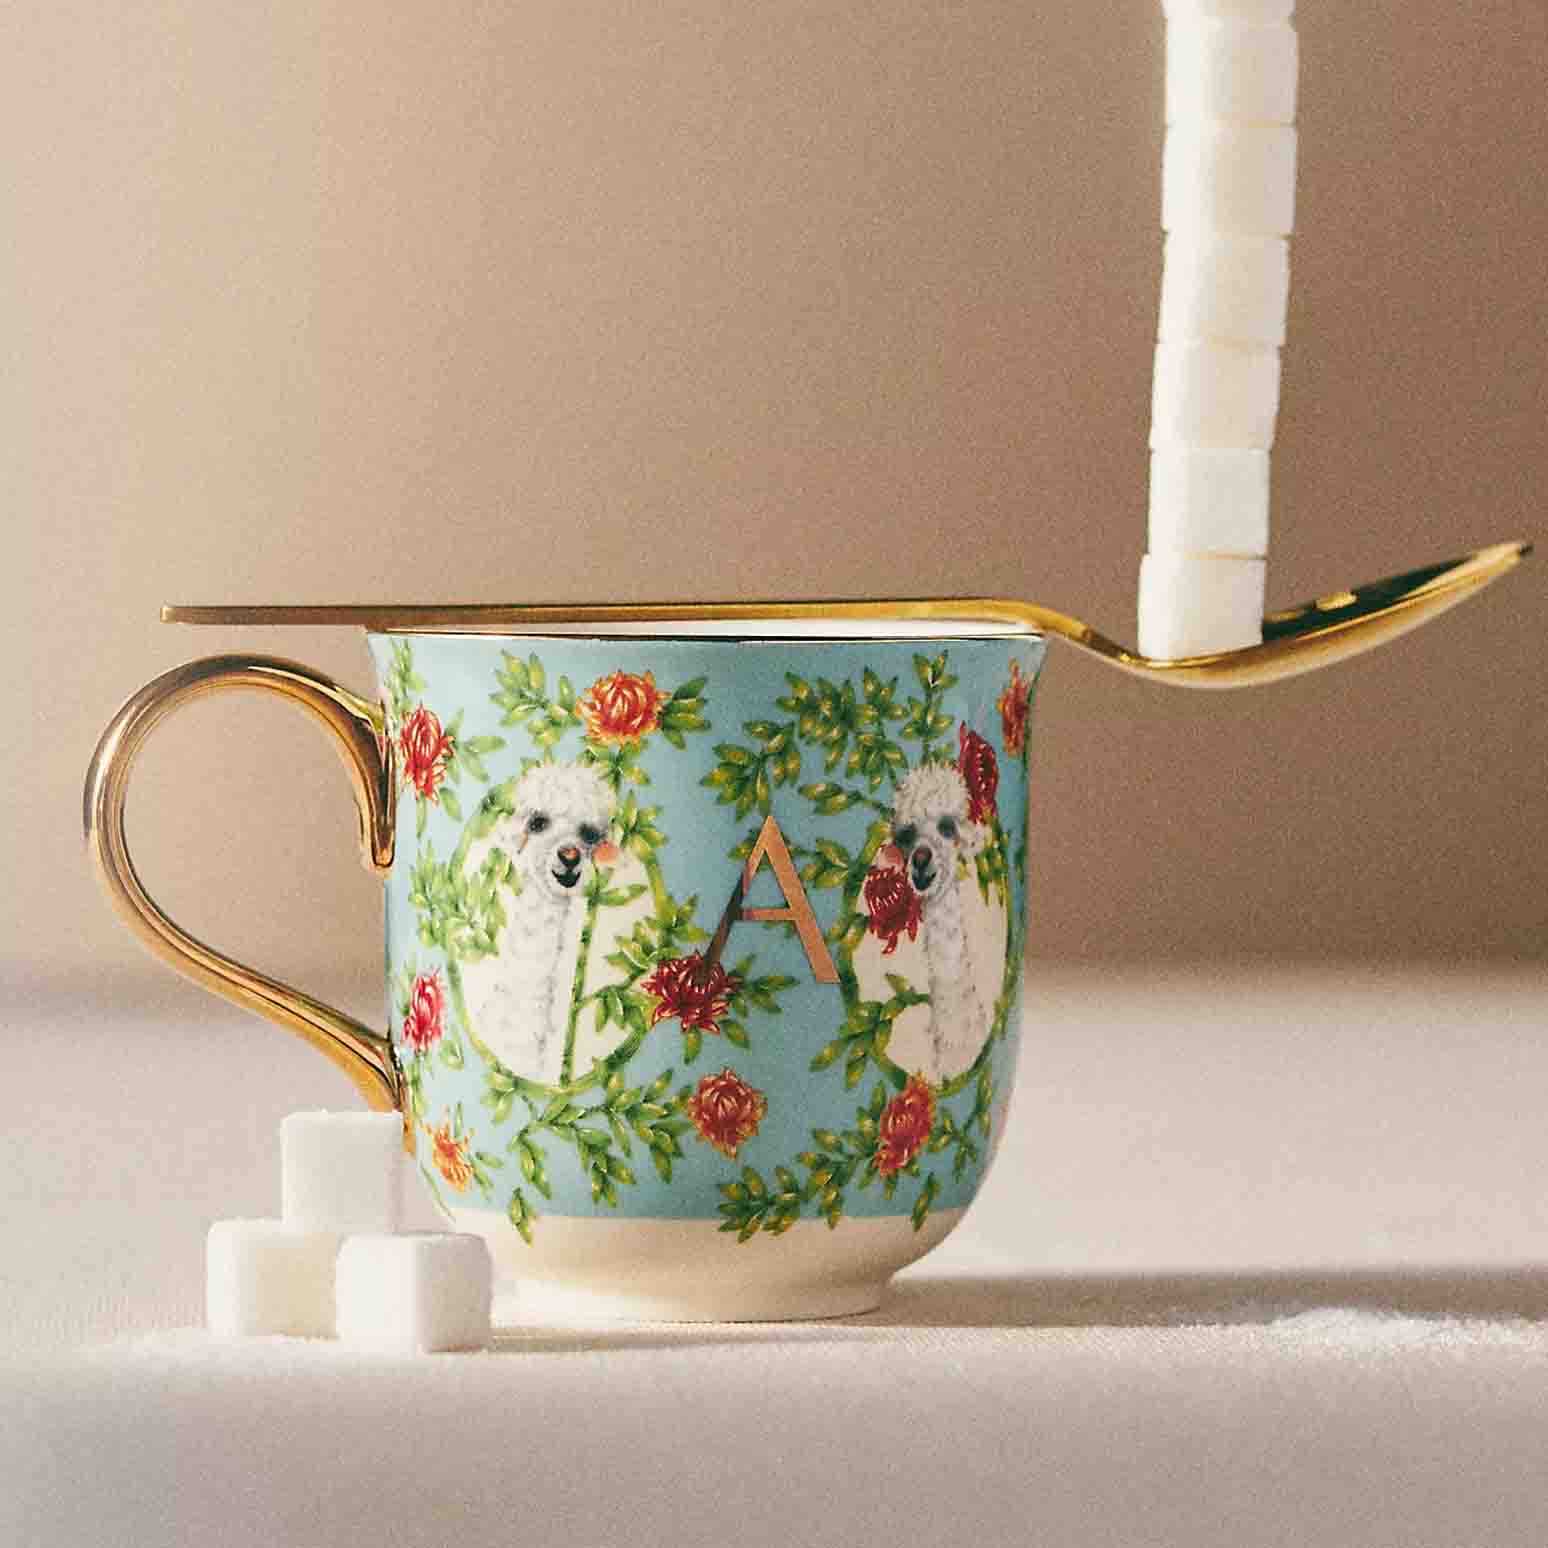 Lou Rota Nature Table Monogram Mug with a gold spoon and cubes of sugar